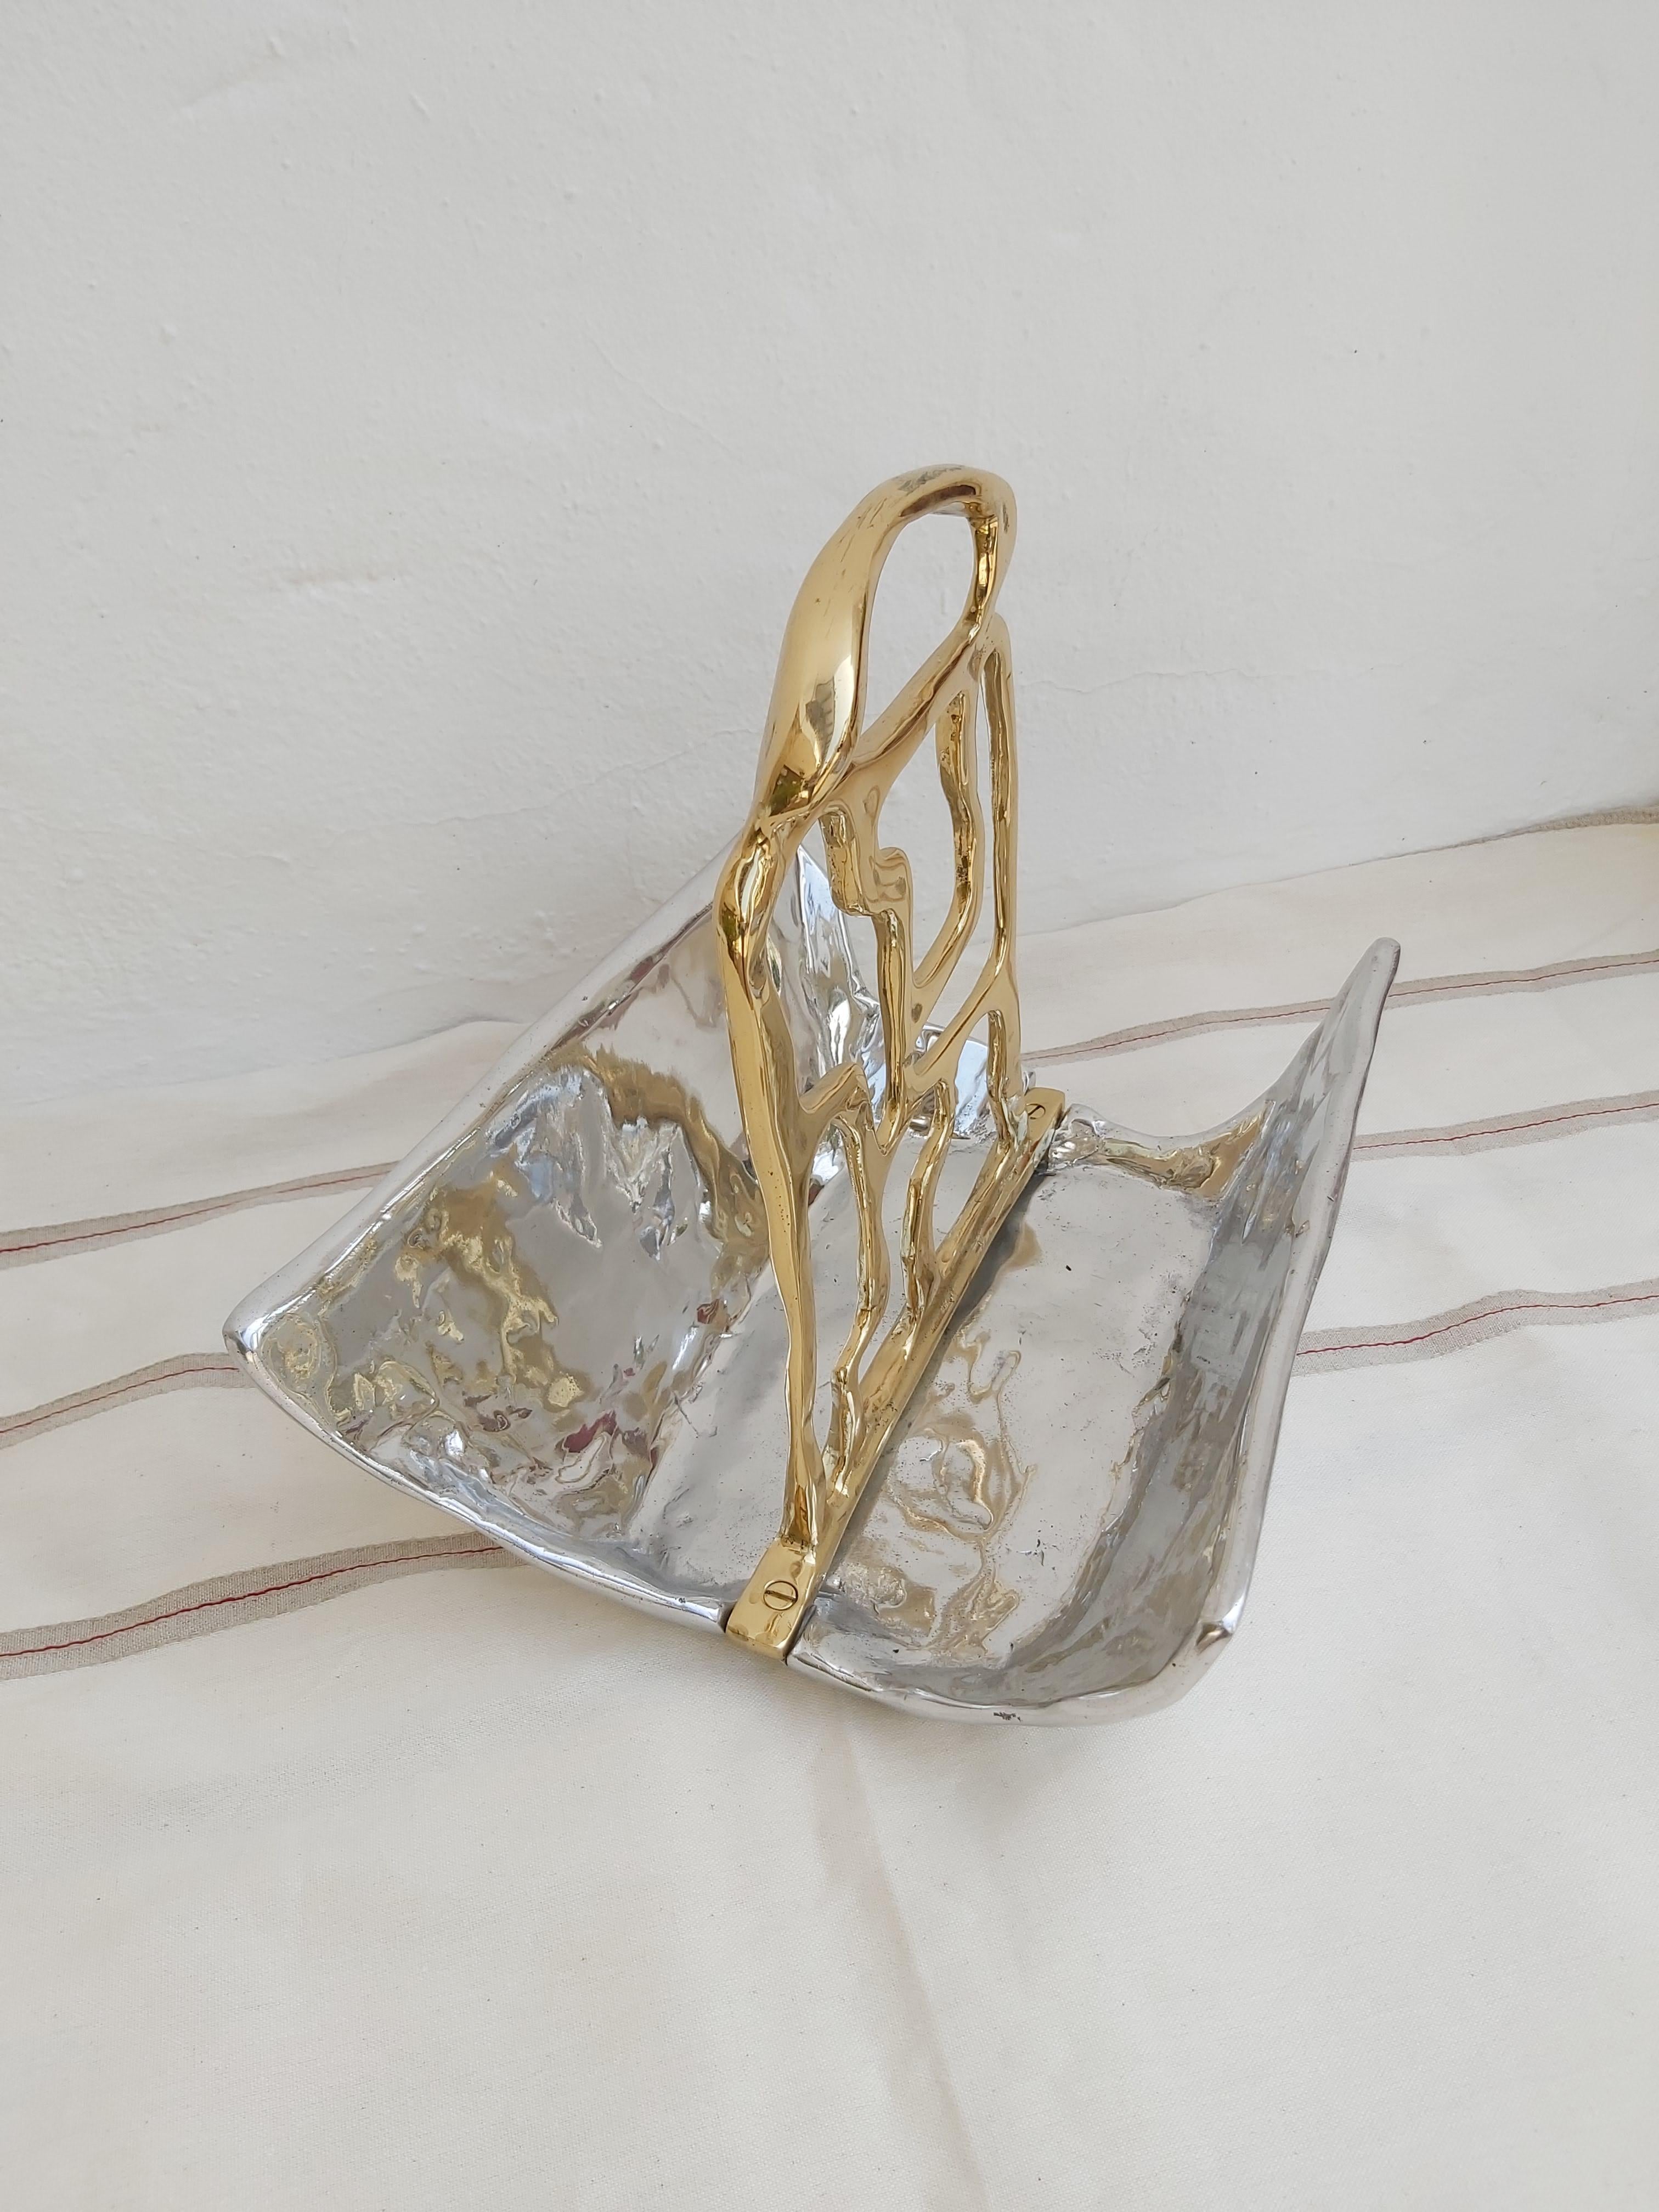 The decorative Magazine Rack was created by David Marshall, it is made of sand cast aluminum and sand cast brass.
Handmade, mounted and finished in our foundry and workshop in Spain from recycled materials.
Certified authentic by the Artist David